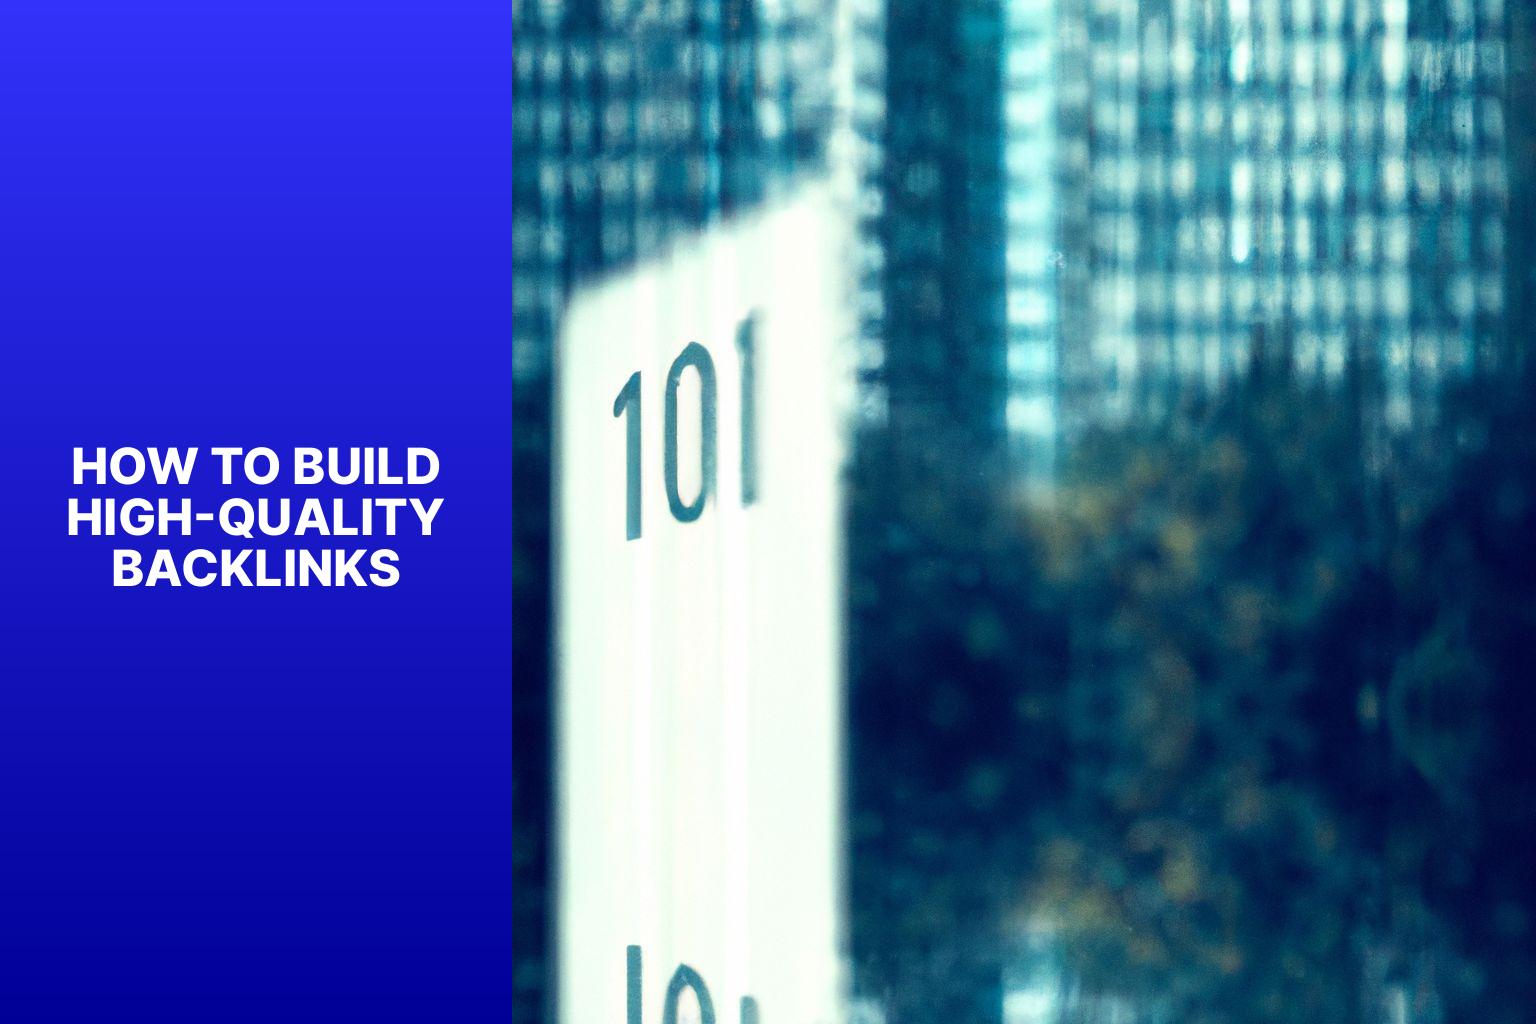 How to Build High-Quality Backlinks - Backlink Quality Over Quantity: Why It Matters 